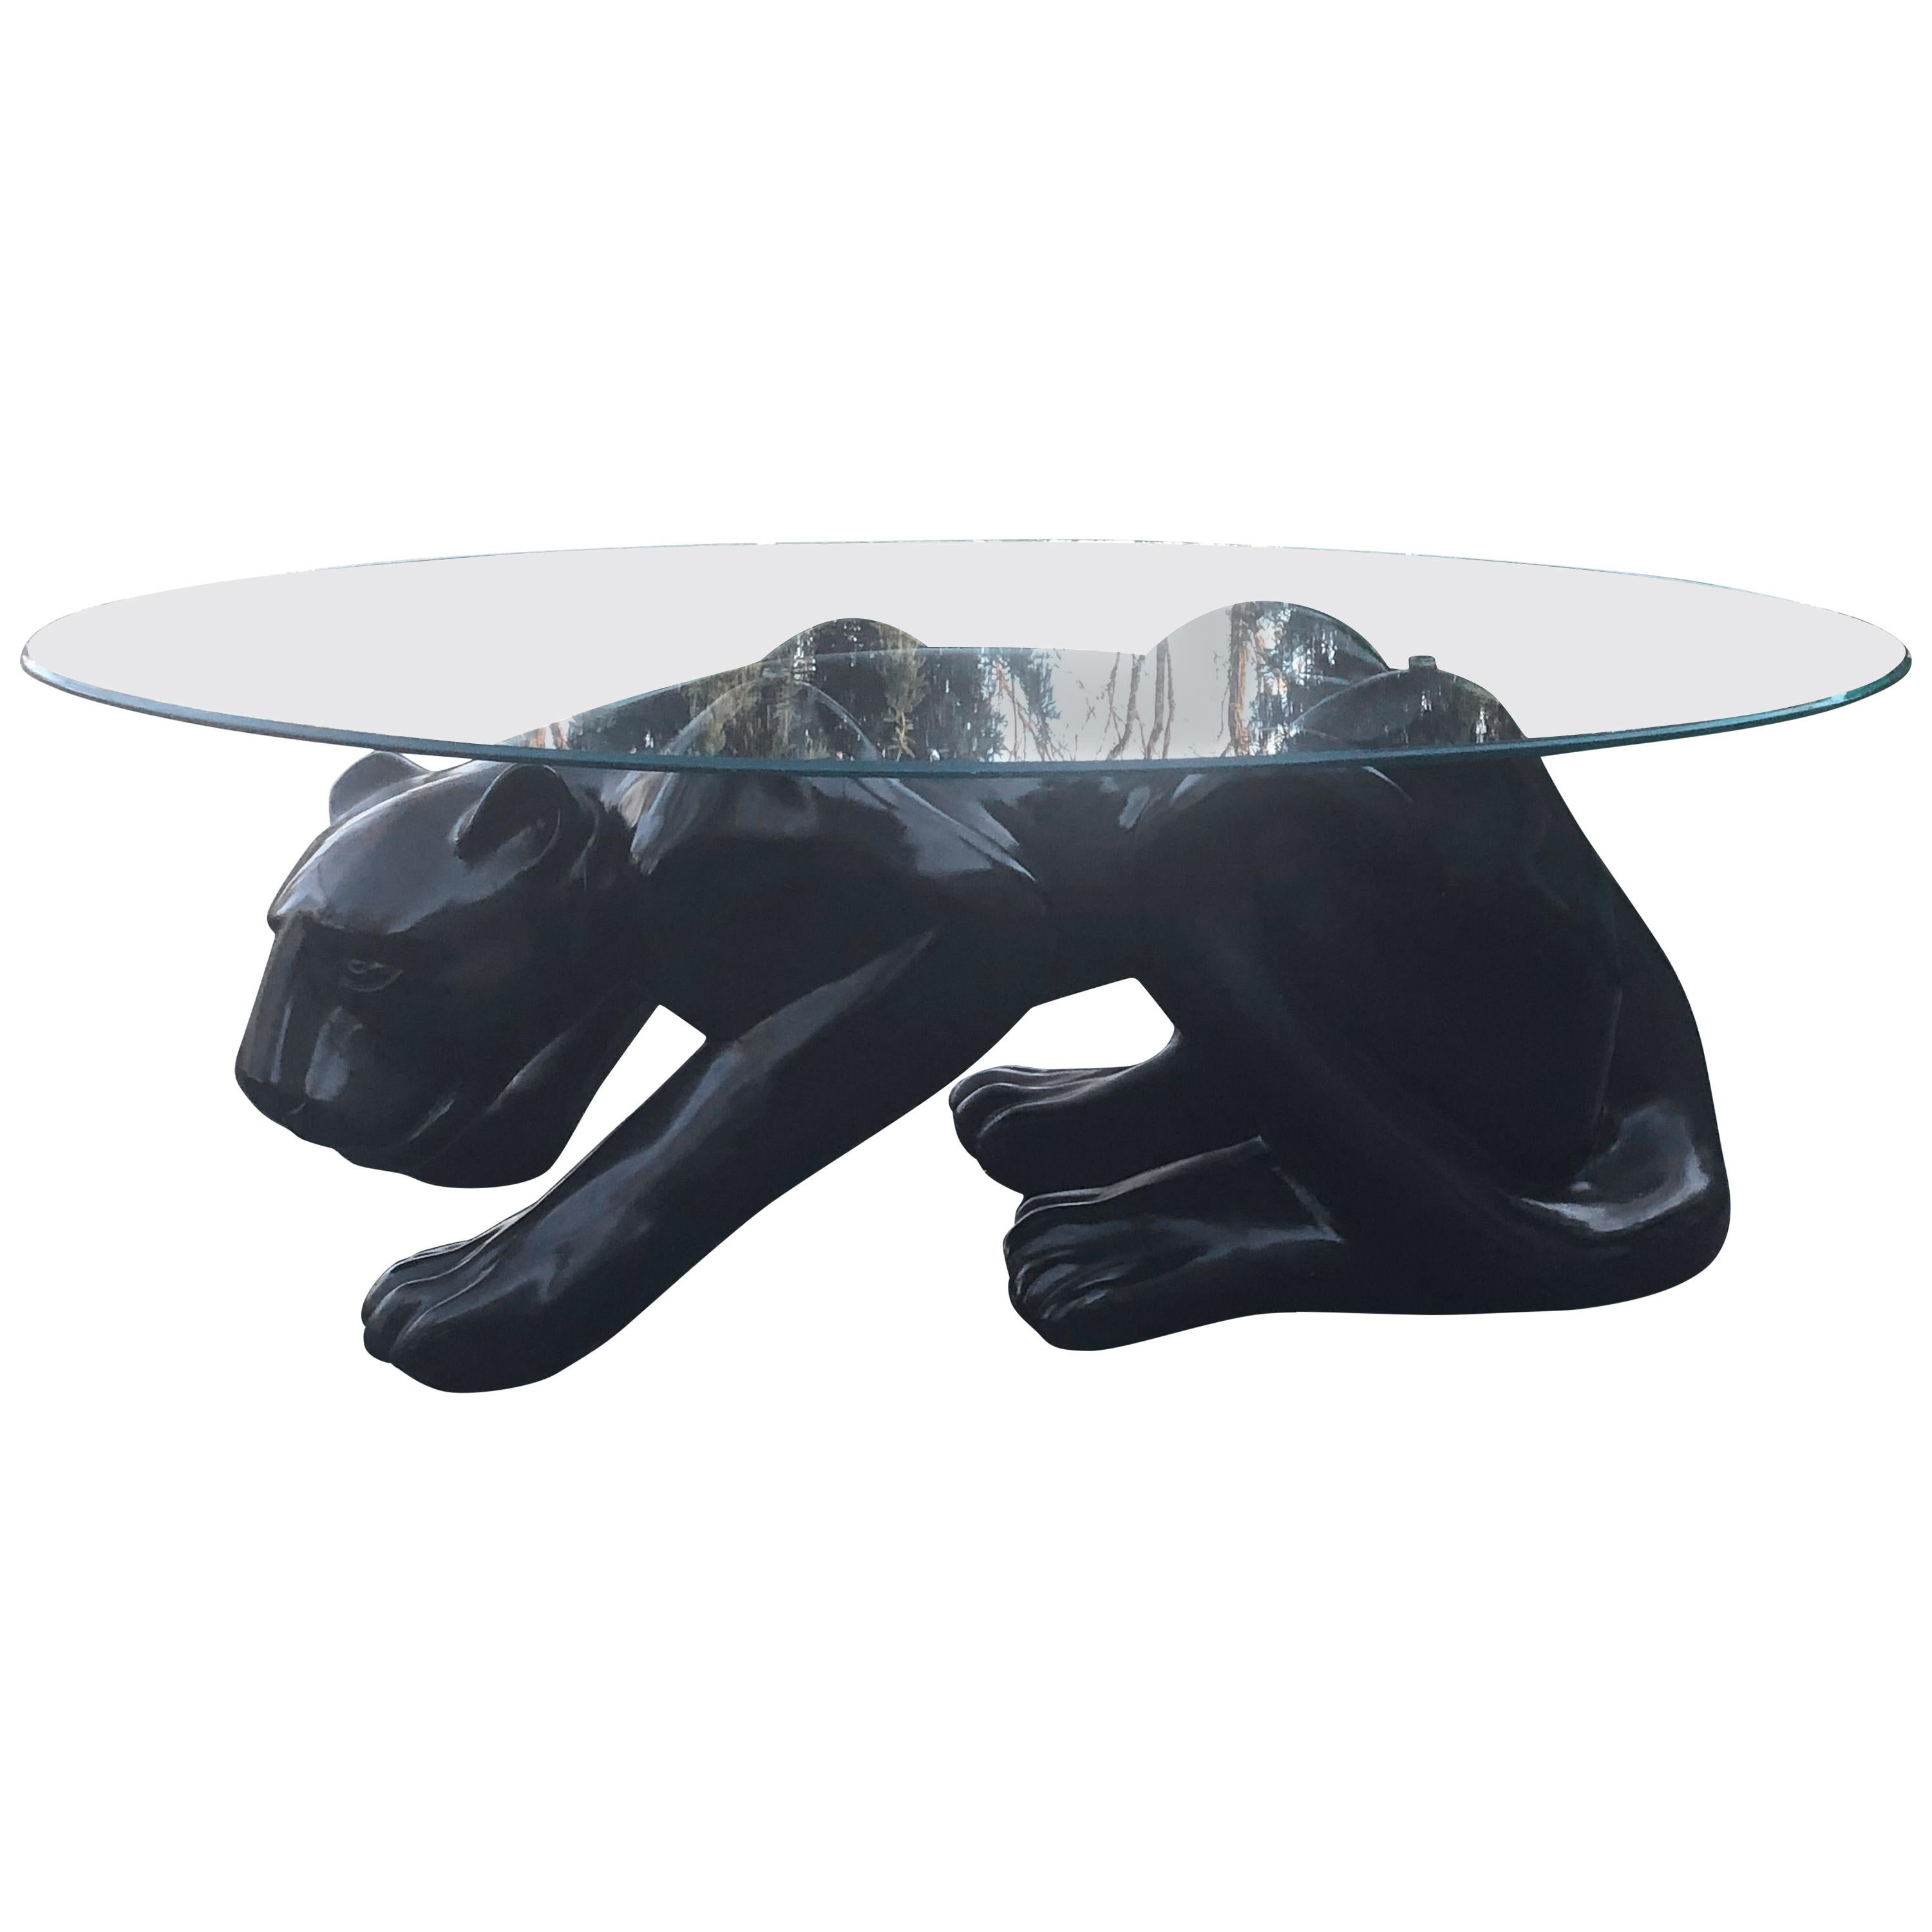 Dramatic Ceramic Black Panther Coffee Table or Sculpture